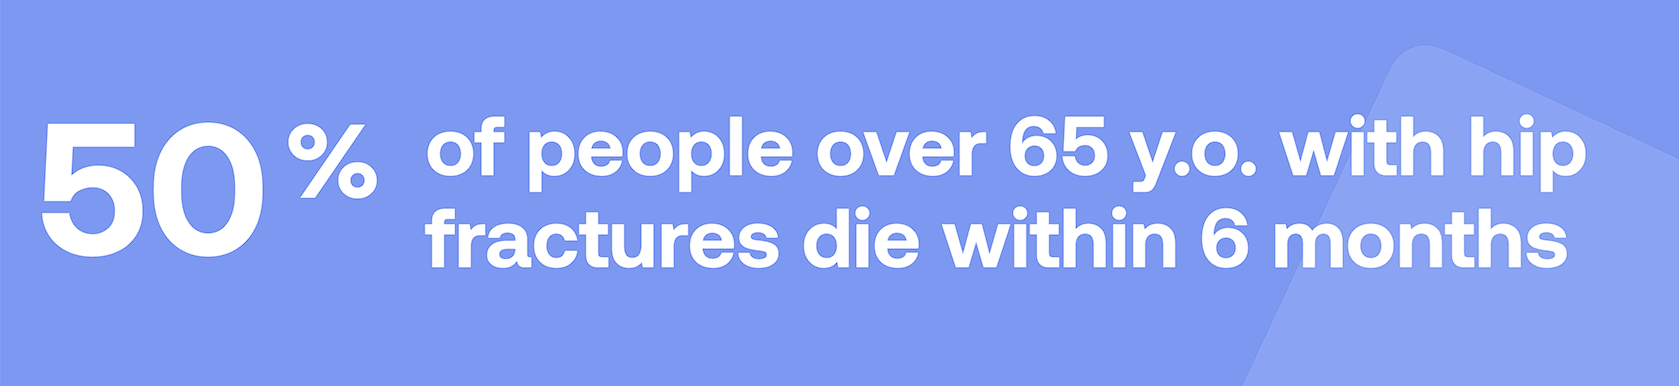 50% of people over 65 y.o. with hip fractures die within 6 months